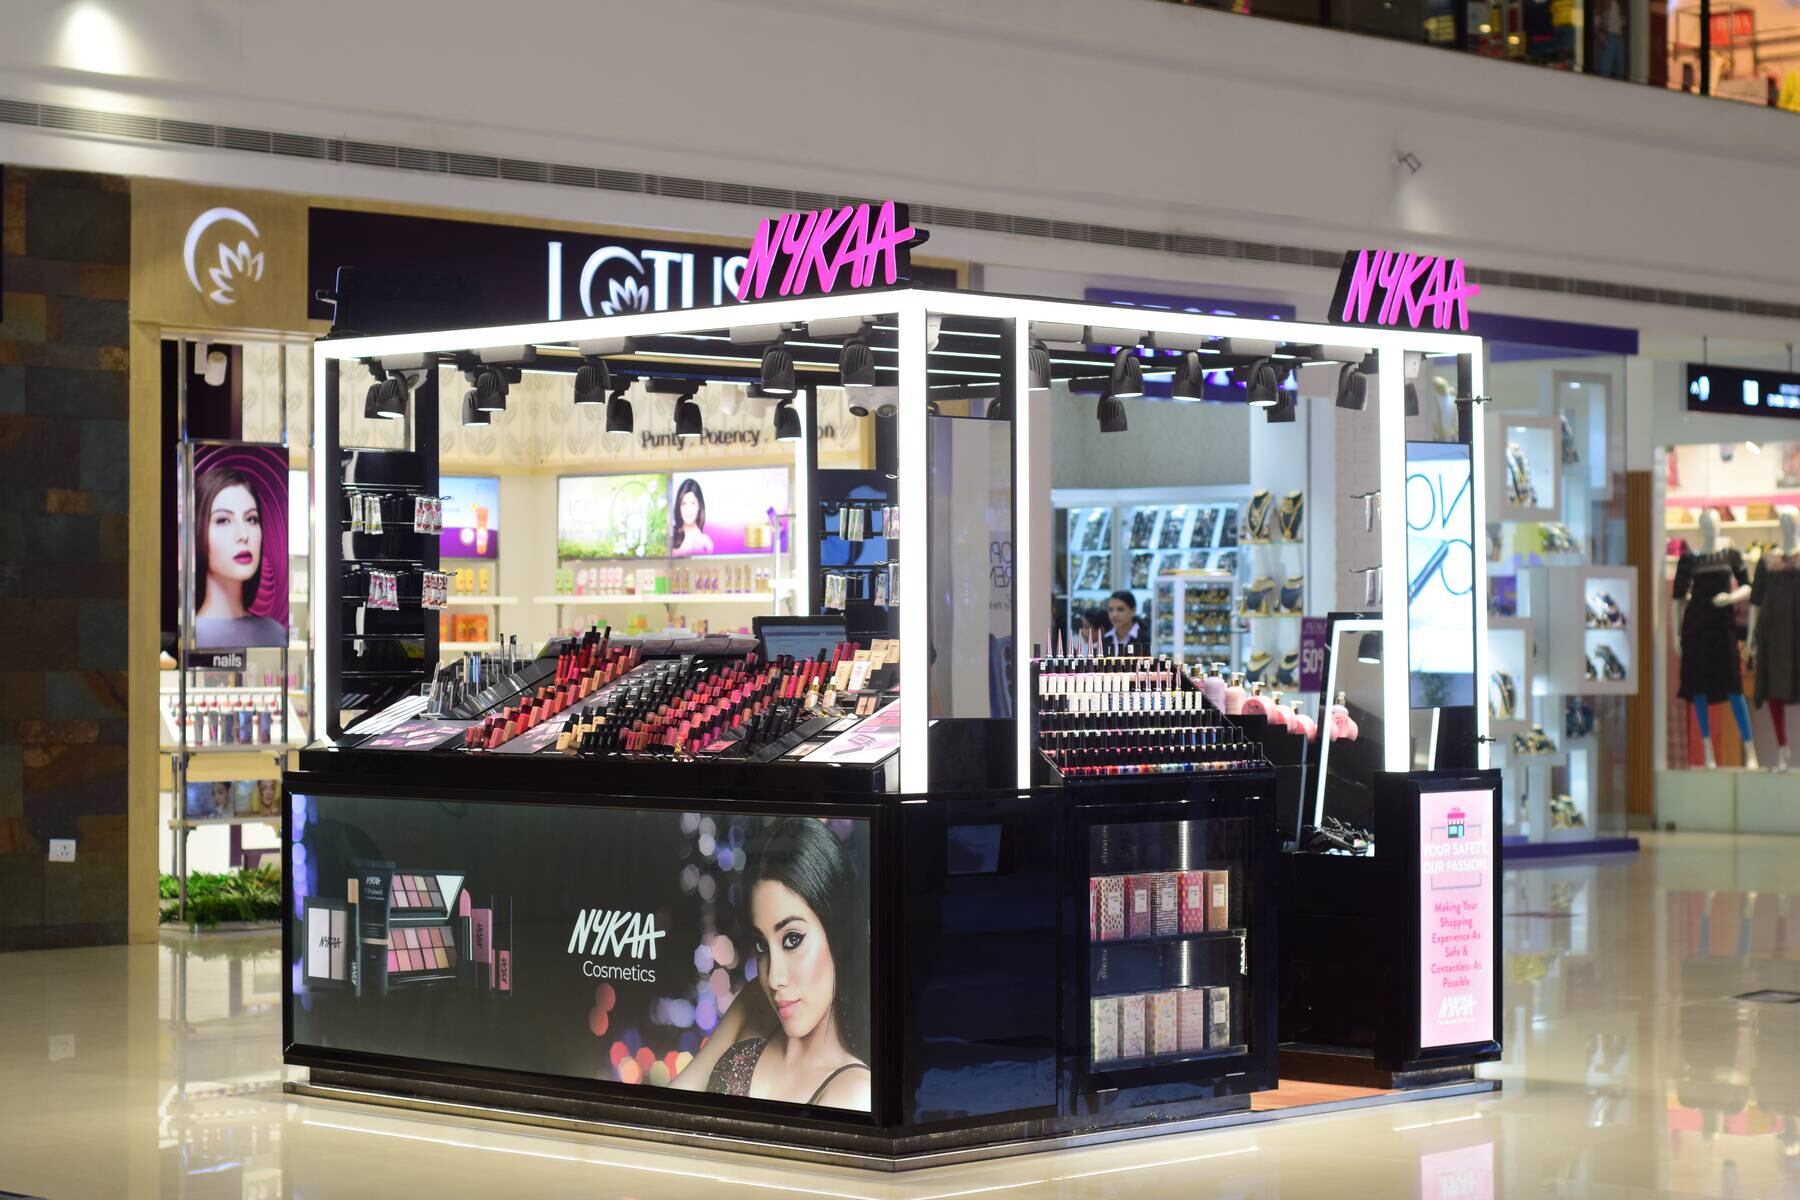 A Nykaa private label kiosk at the Mall of Travancore in Thiruvananthapuram, Kerala.